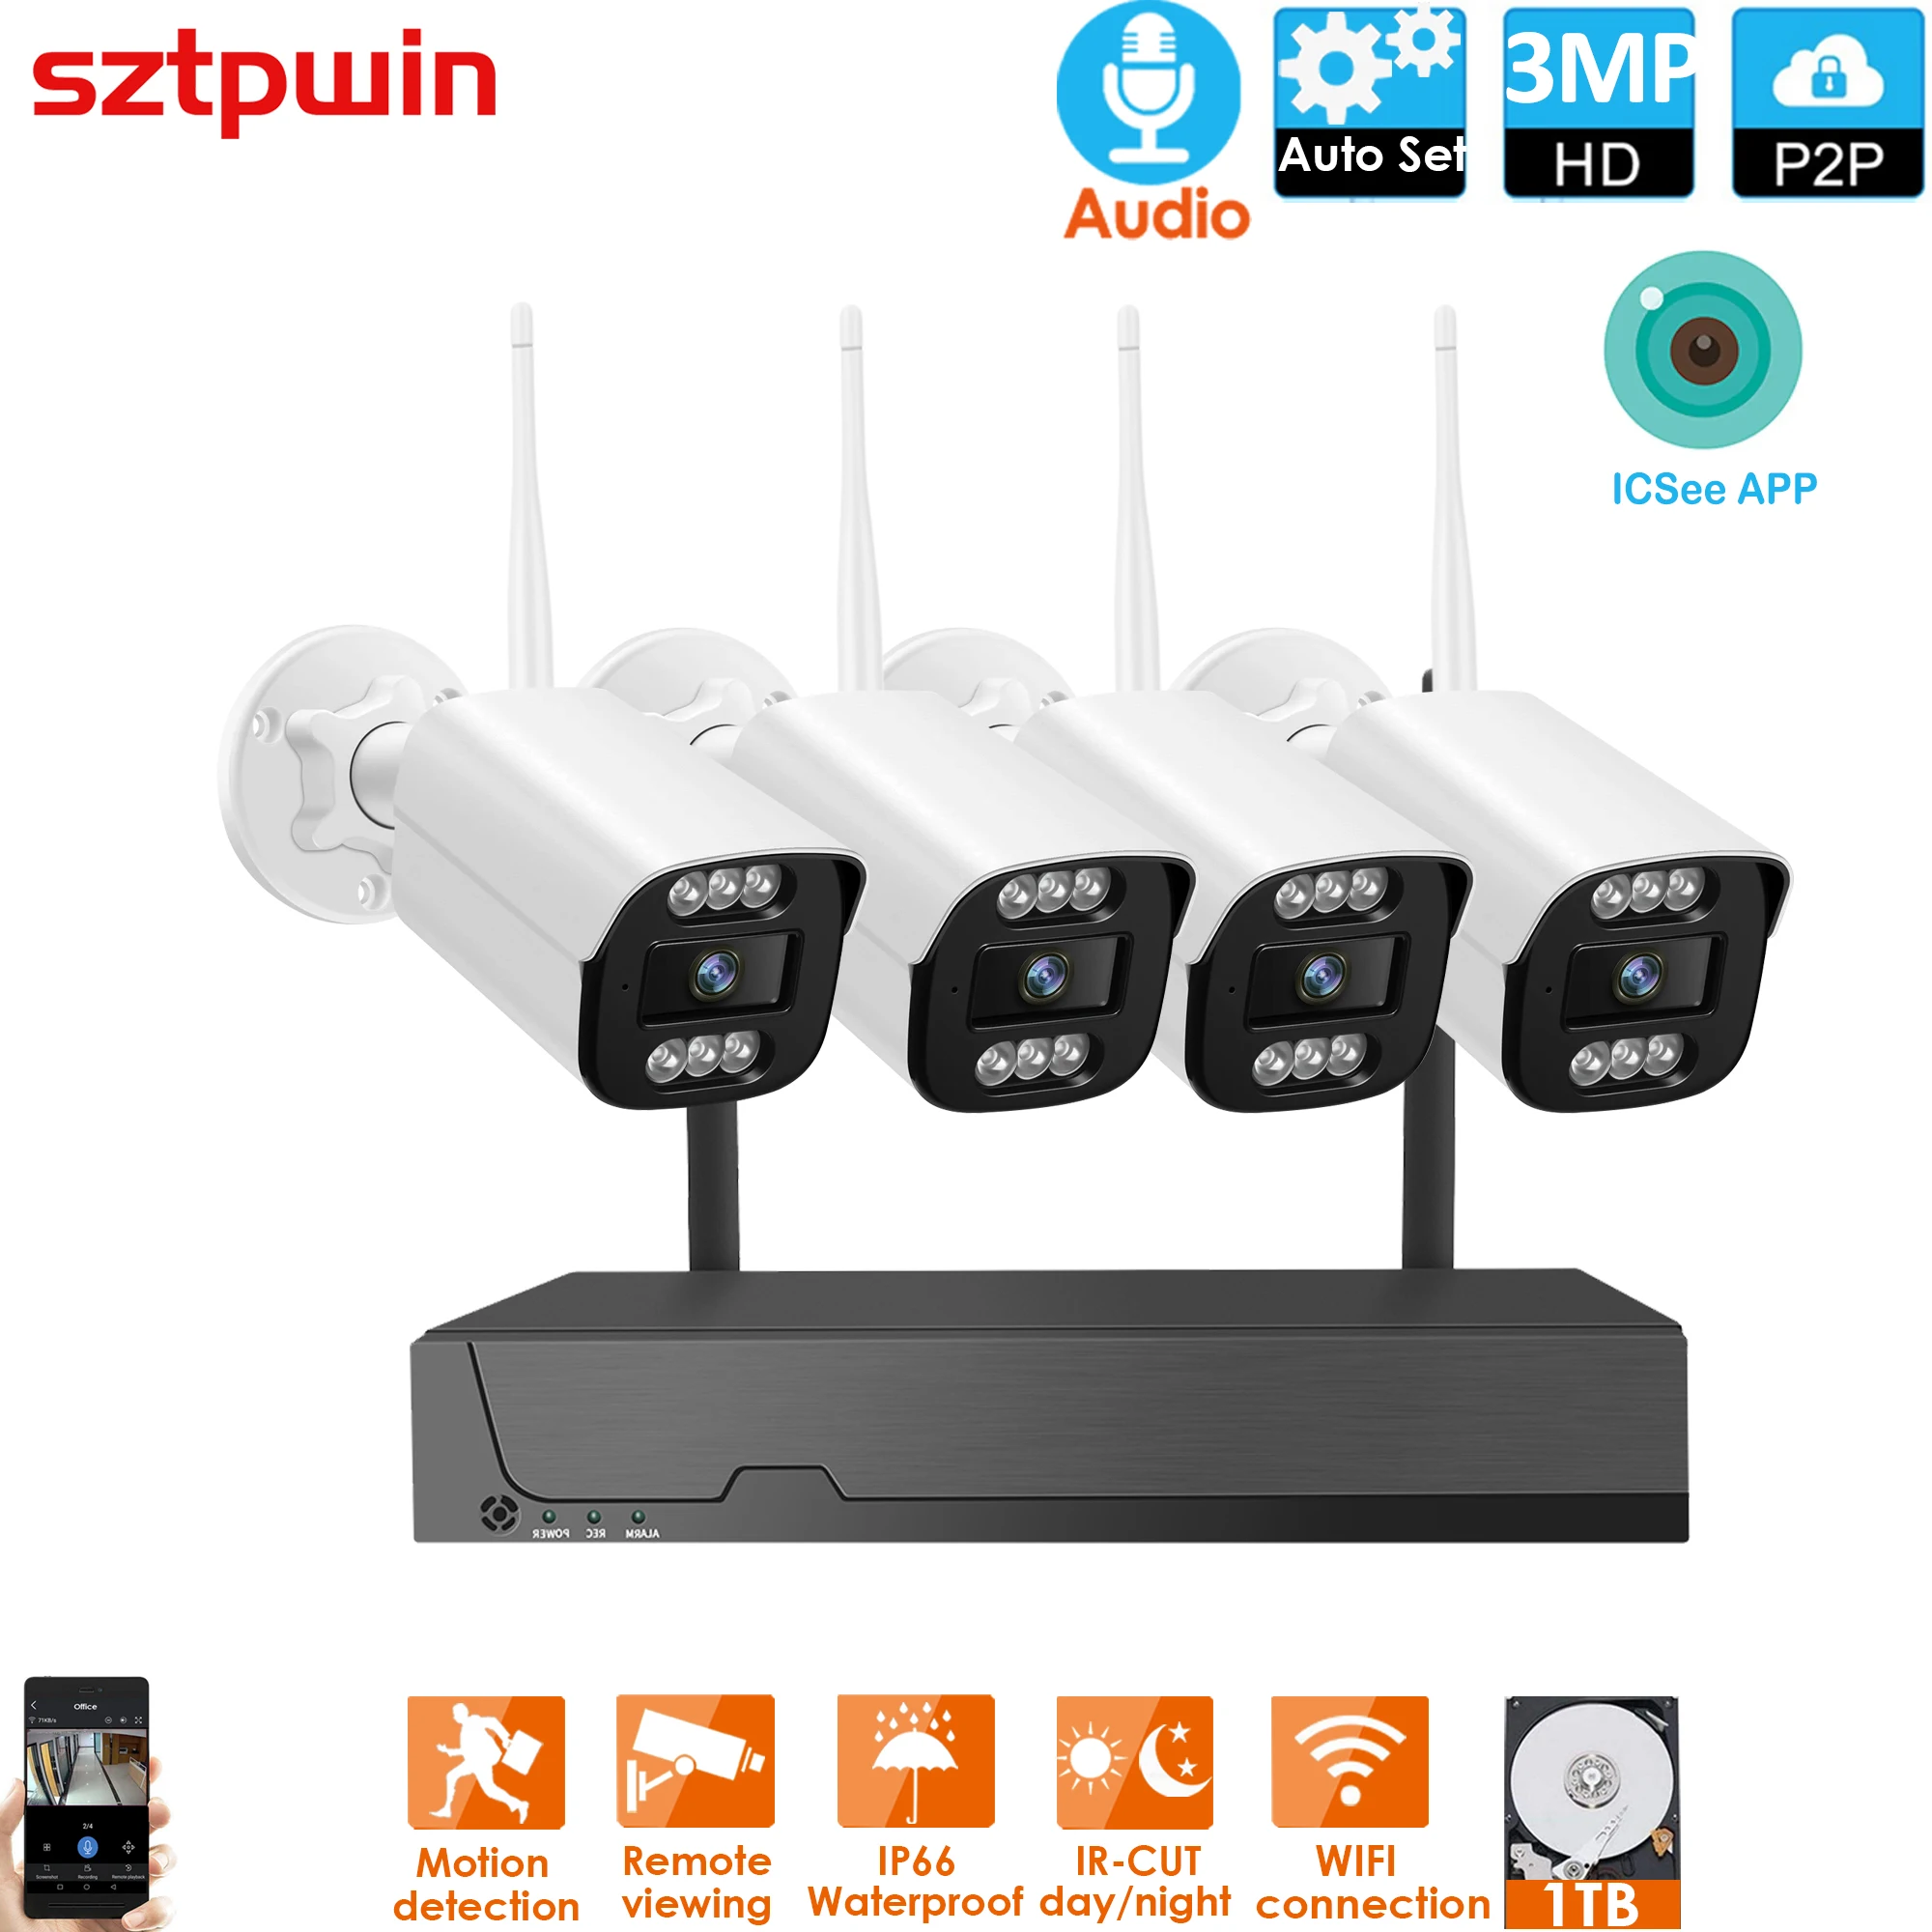 

XMEYE 4CH 3.0MP HD Audio Wireless NVR P2P 3MP Indoor Outdoor IR Night Vision Security Plastic Network IP Camera WIFI CCTV System